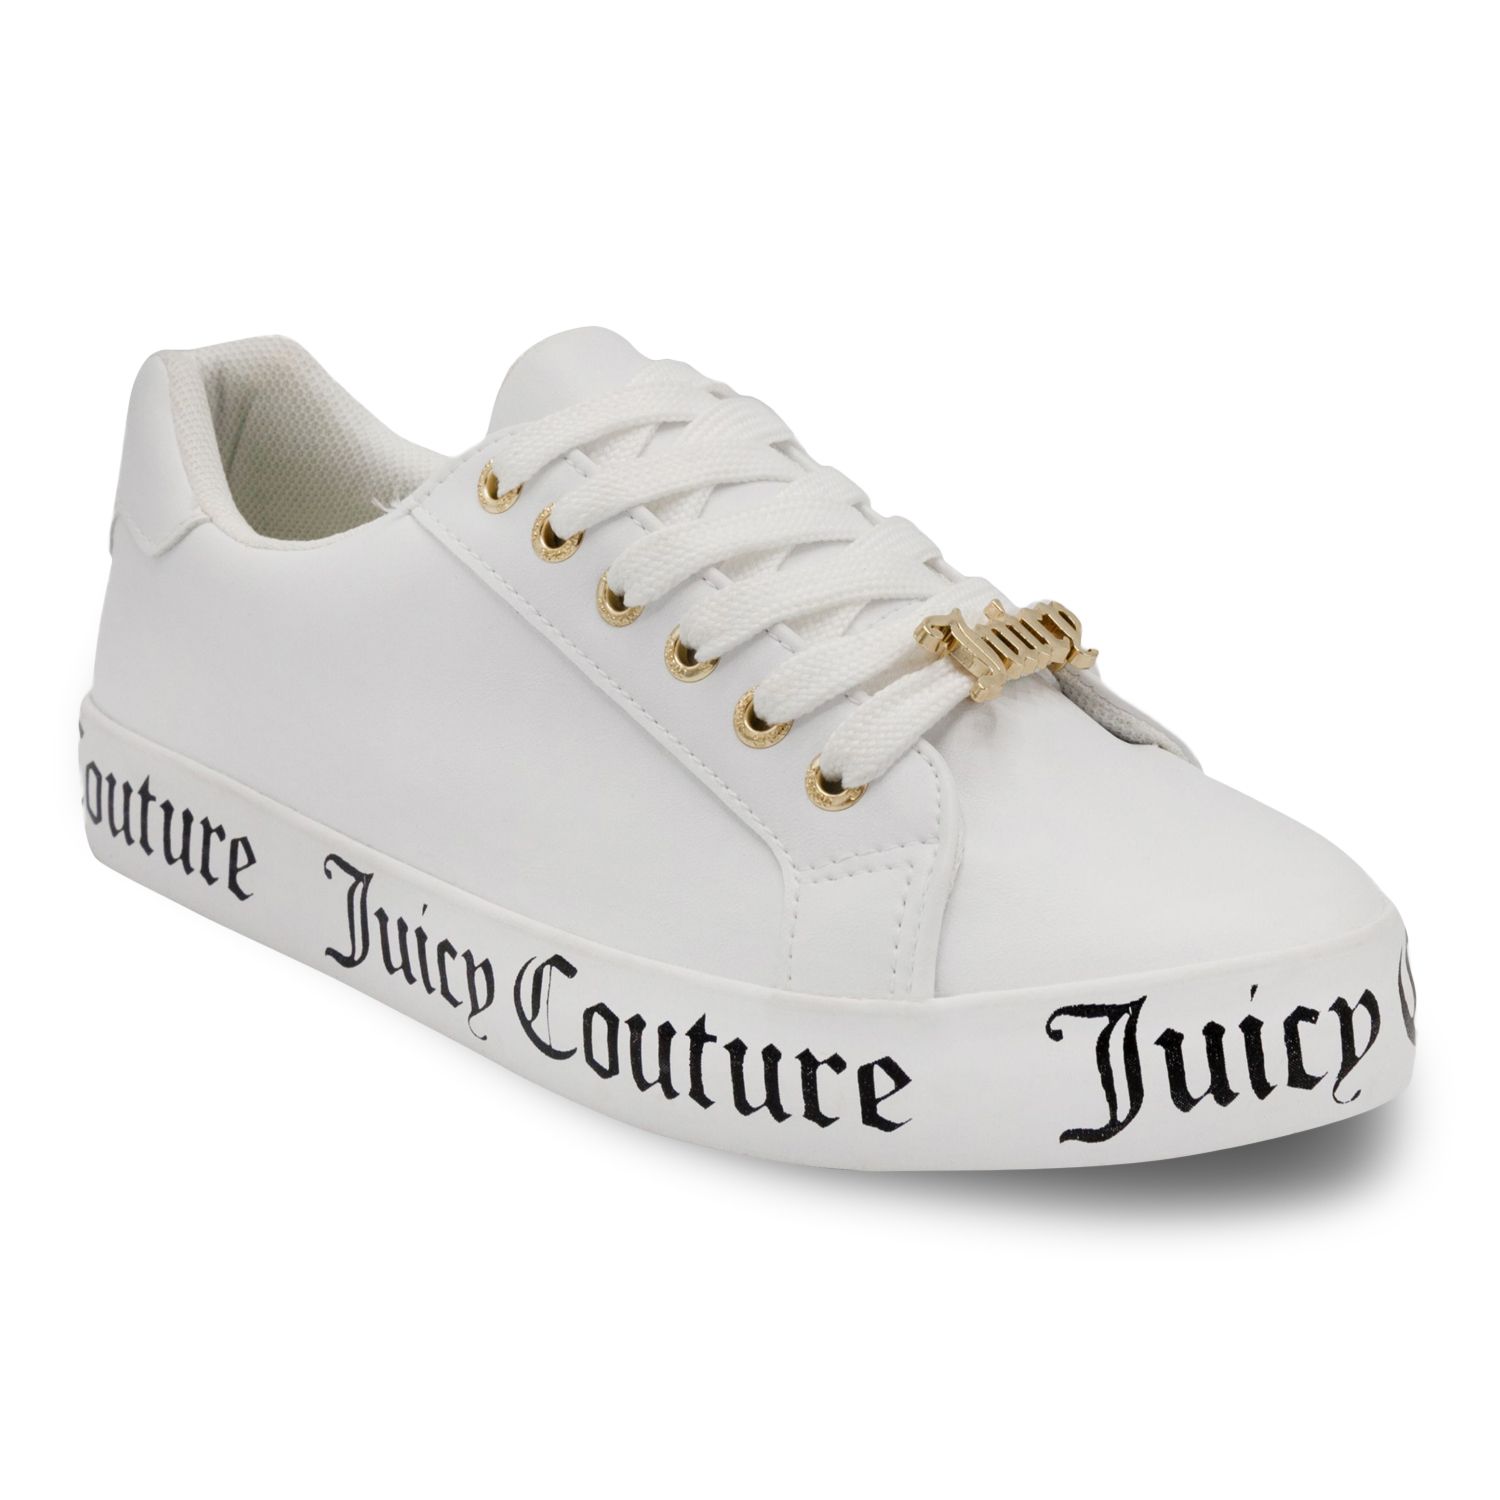 Juicy Couture Chatter Women's Sneakers